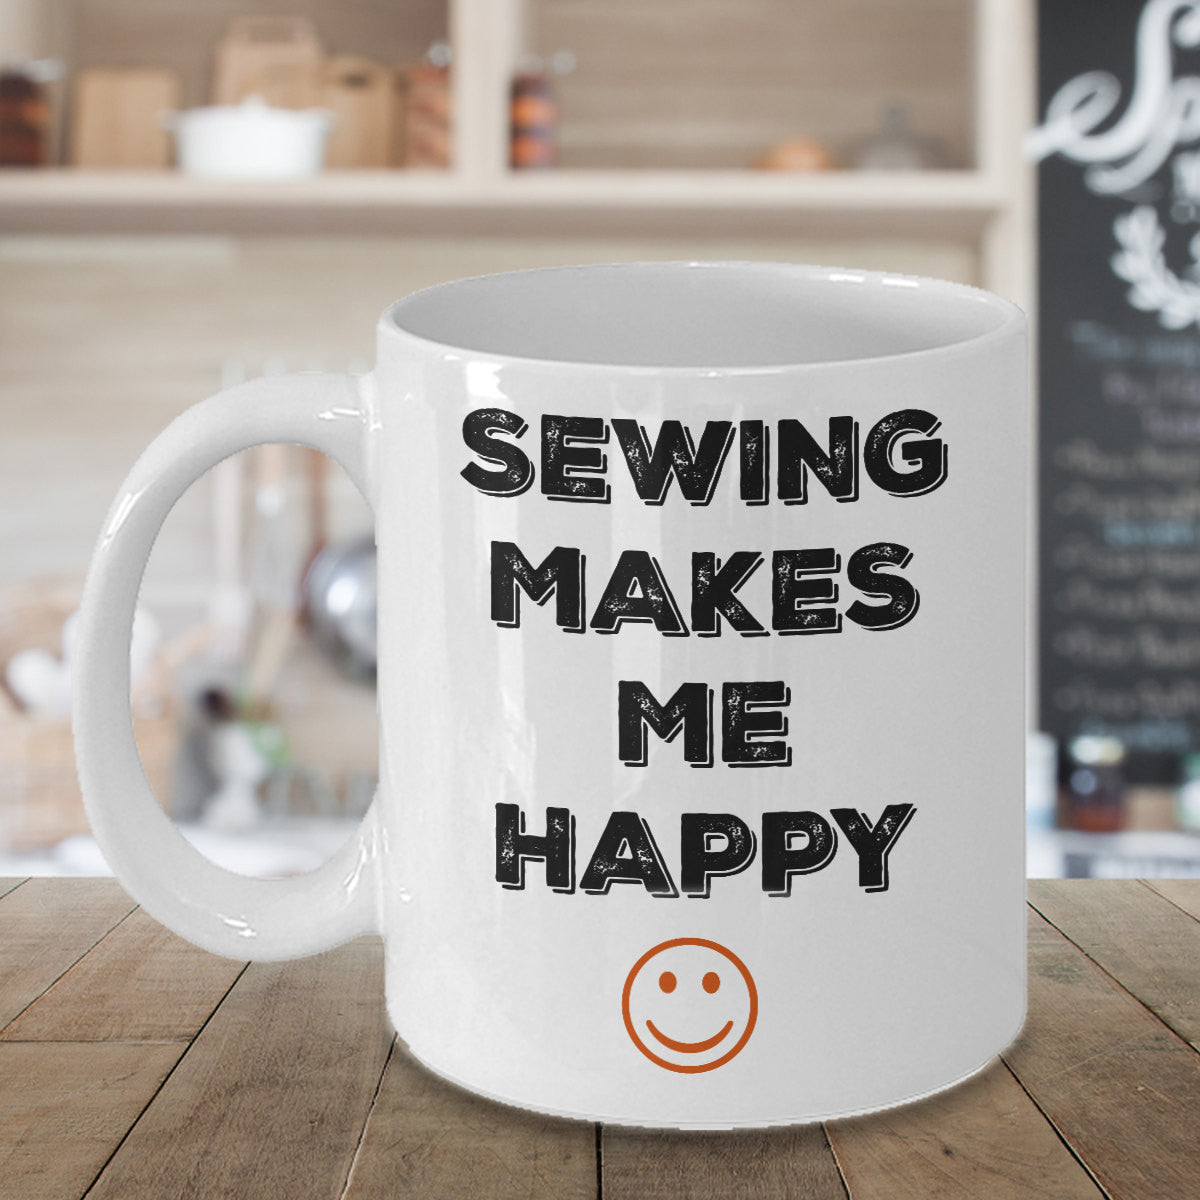 Sewing Makes Me Happy Novelty Coffee Mug Sentiment Gifts Holidays Fun Inexpensive Sewing Gift